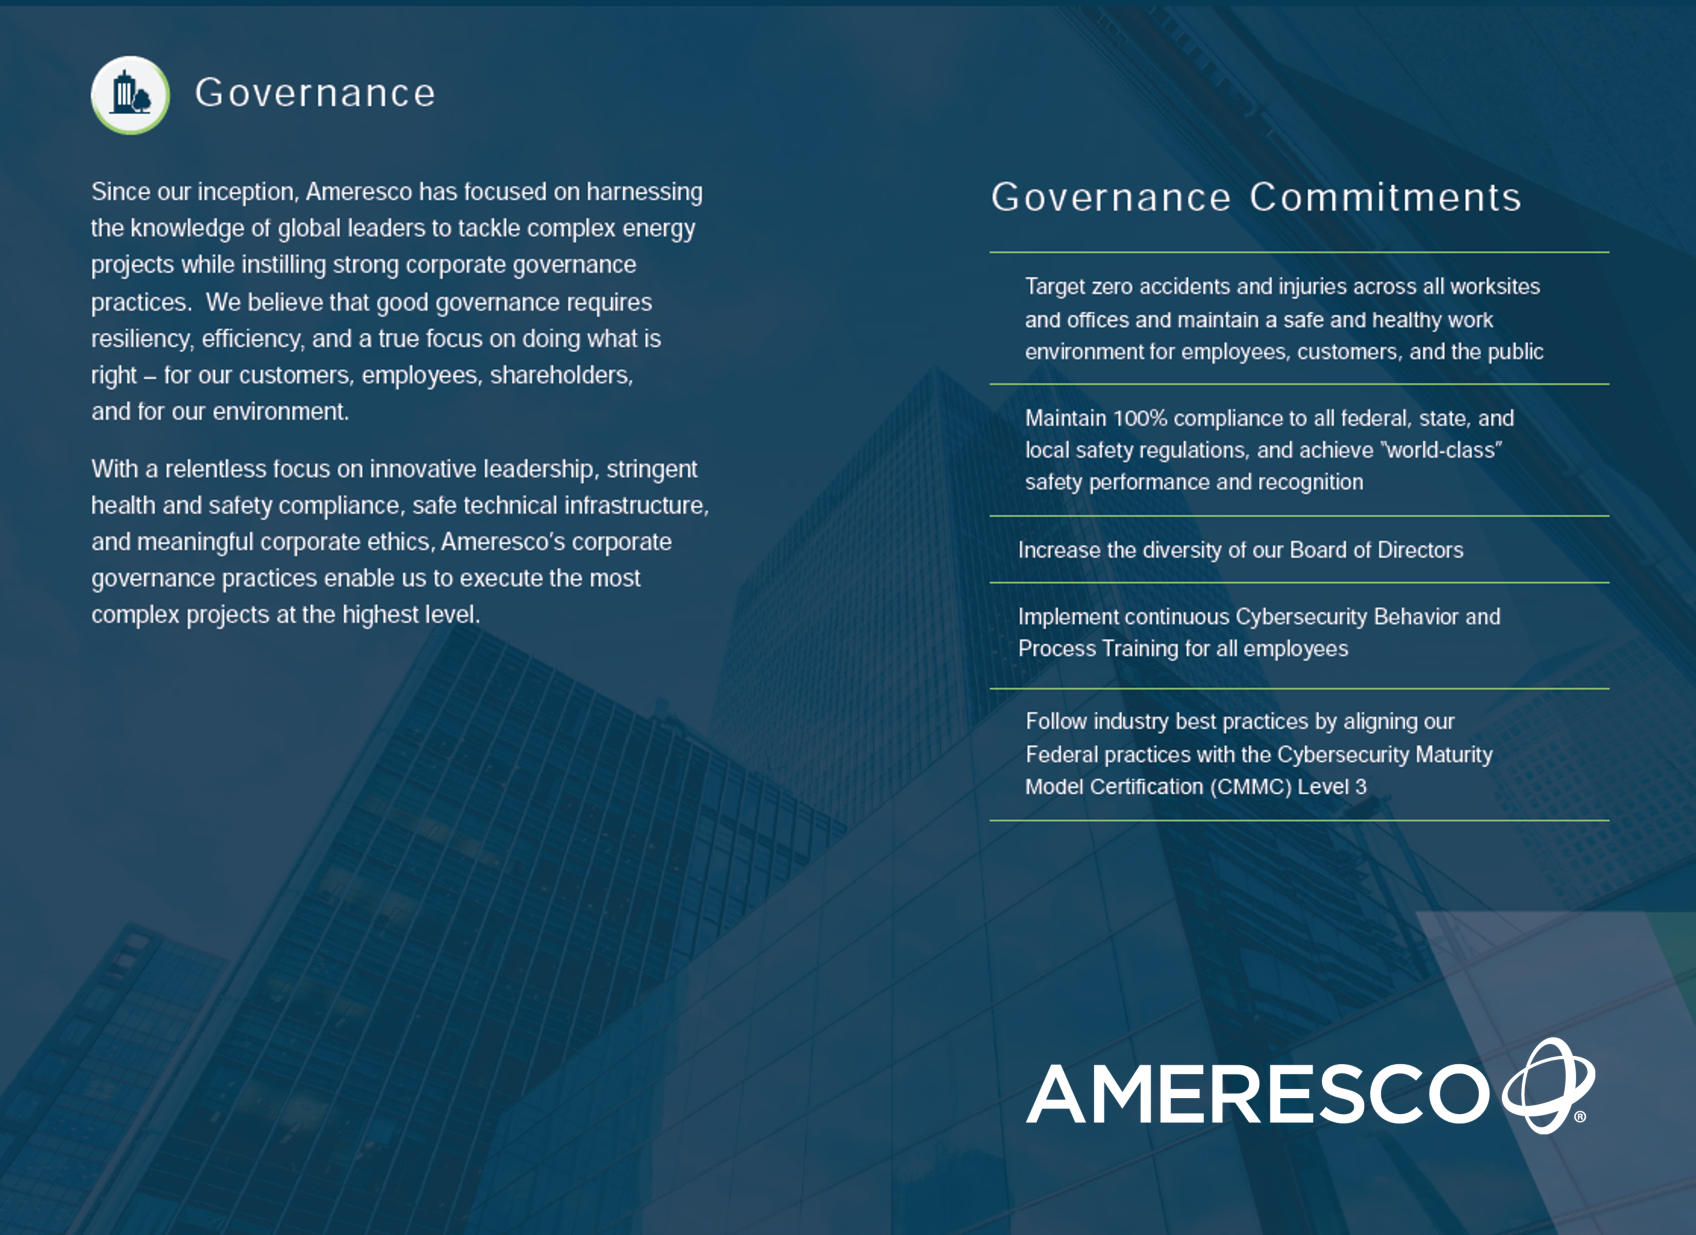 Reproduction of the Governance page in the Ameresco 2021 ESG Report